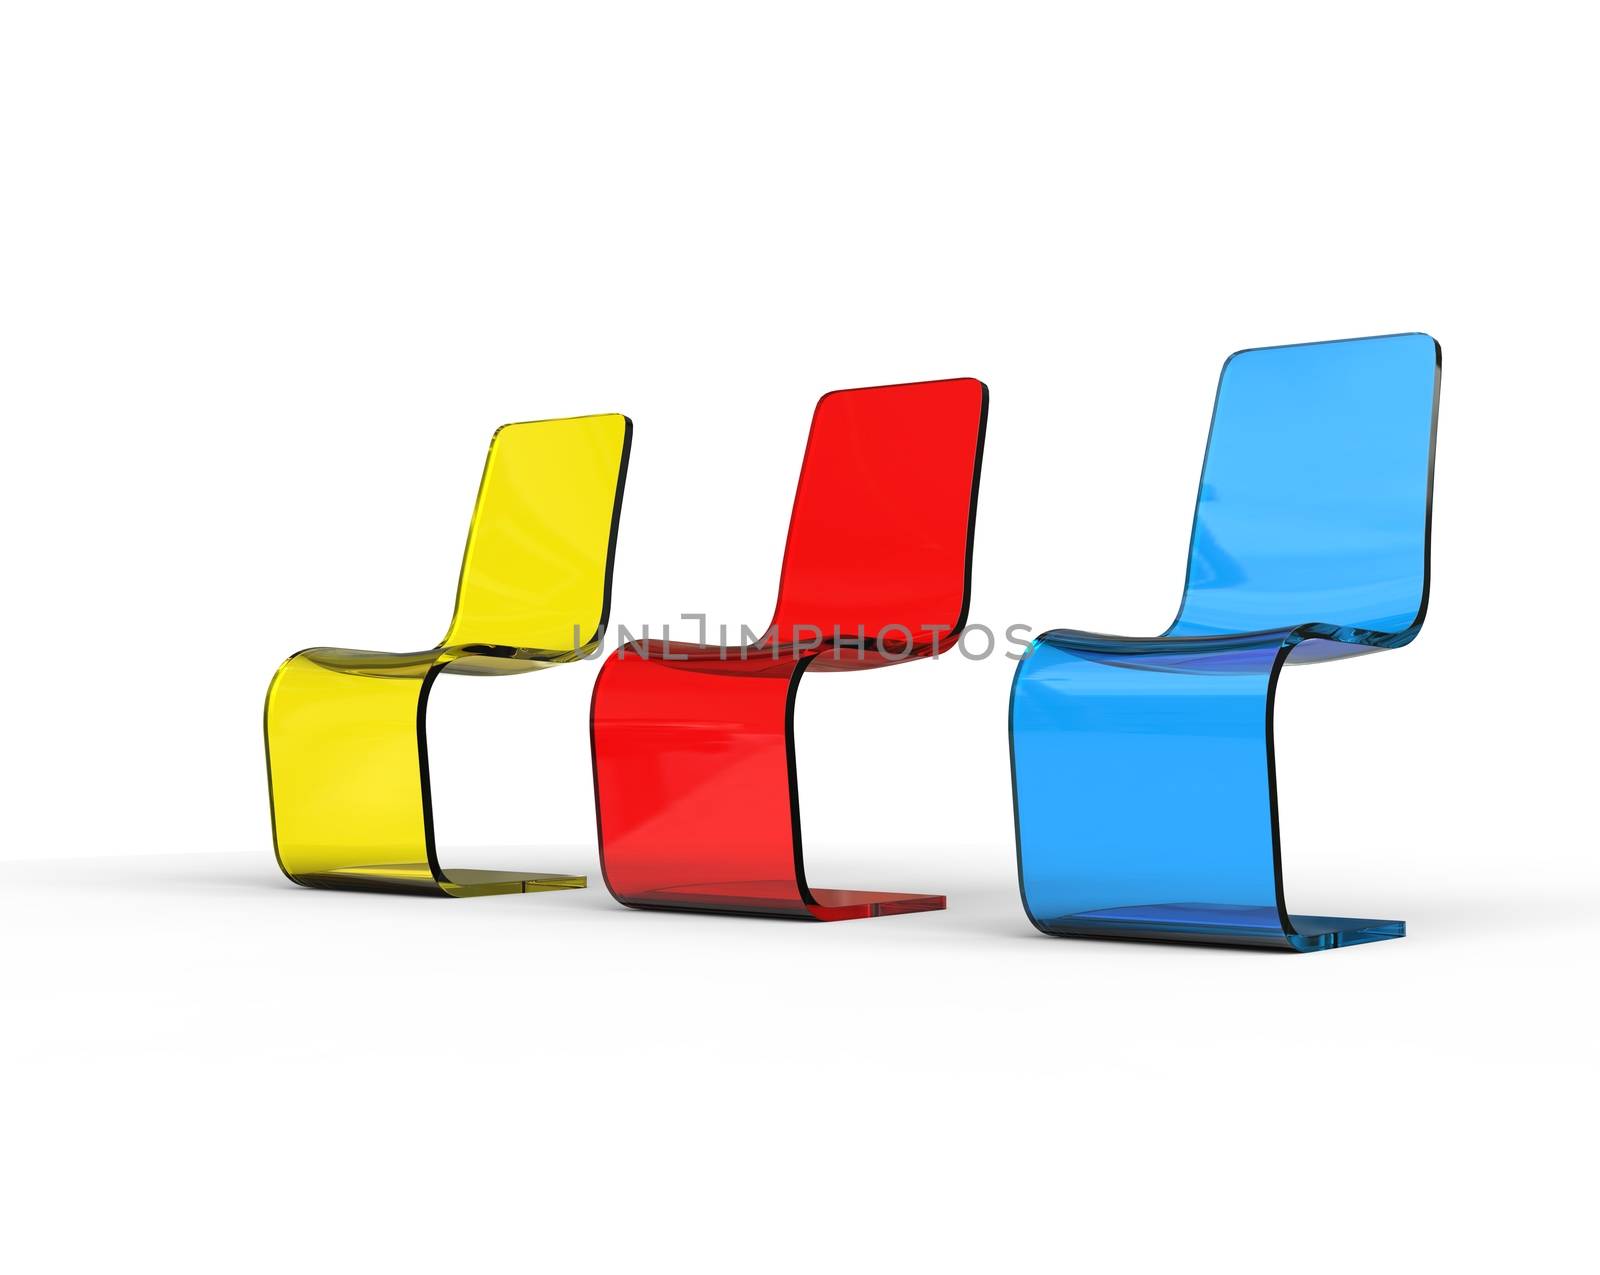 Futuristic yellow, red and blue plastic chairs on white.